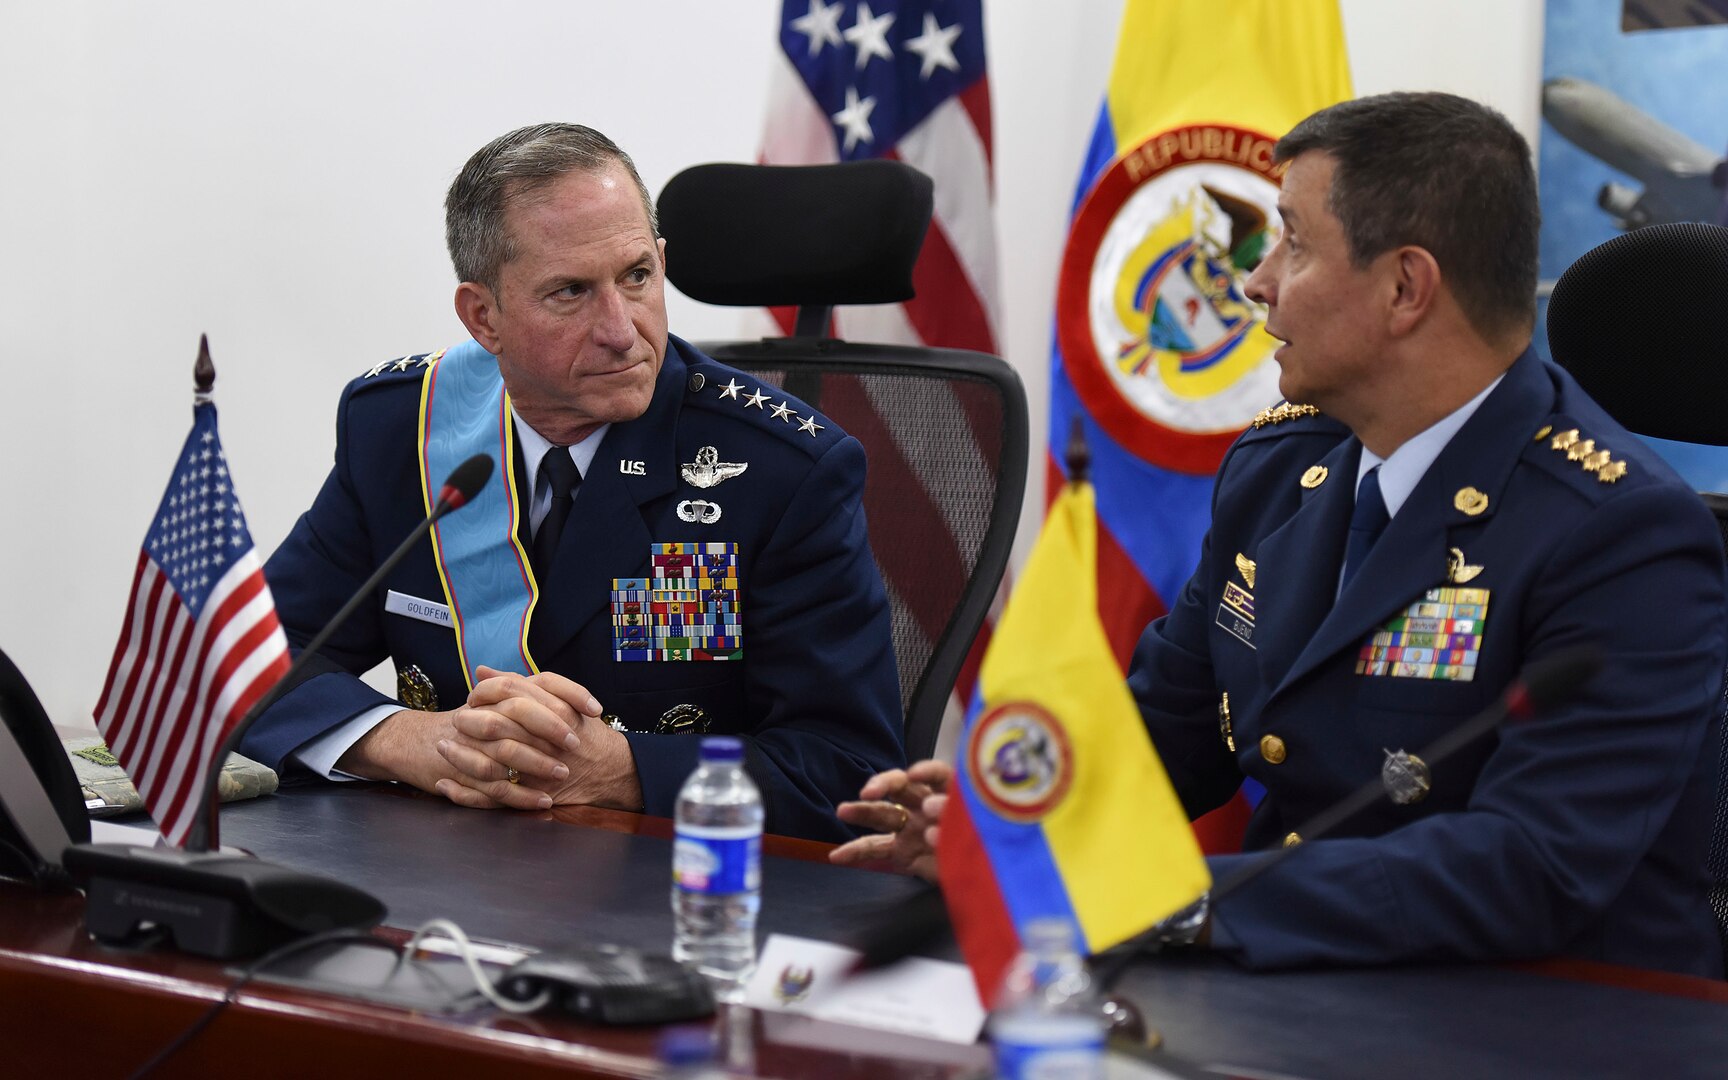 Commander of the Colombian Air Force General Carlos Eduardo Bueno Vargas briefs Air Force Chief of Staff Gen. David L. Goldfein on capabilities and common interests between the countries' air forces, in Bogota, Colombia, Nov. 15, 2018. Regional partnerships like that of the U.S. and Colombia reflect an enduring promise of a cooperative, prosperous and secure hemisphere. (U.S. Air Force photo by Tech Sgt. Anthony Nelson Jr.)